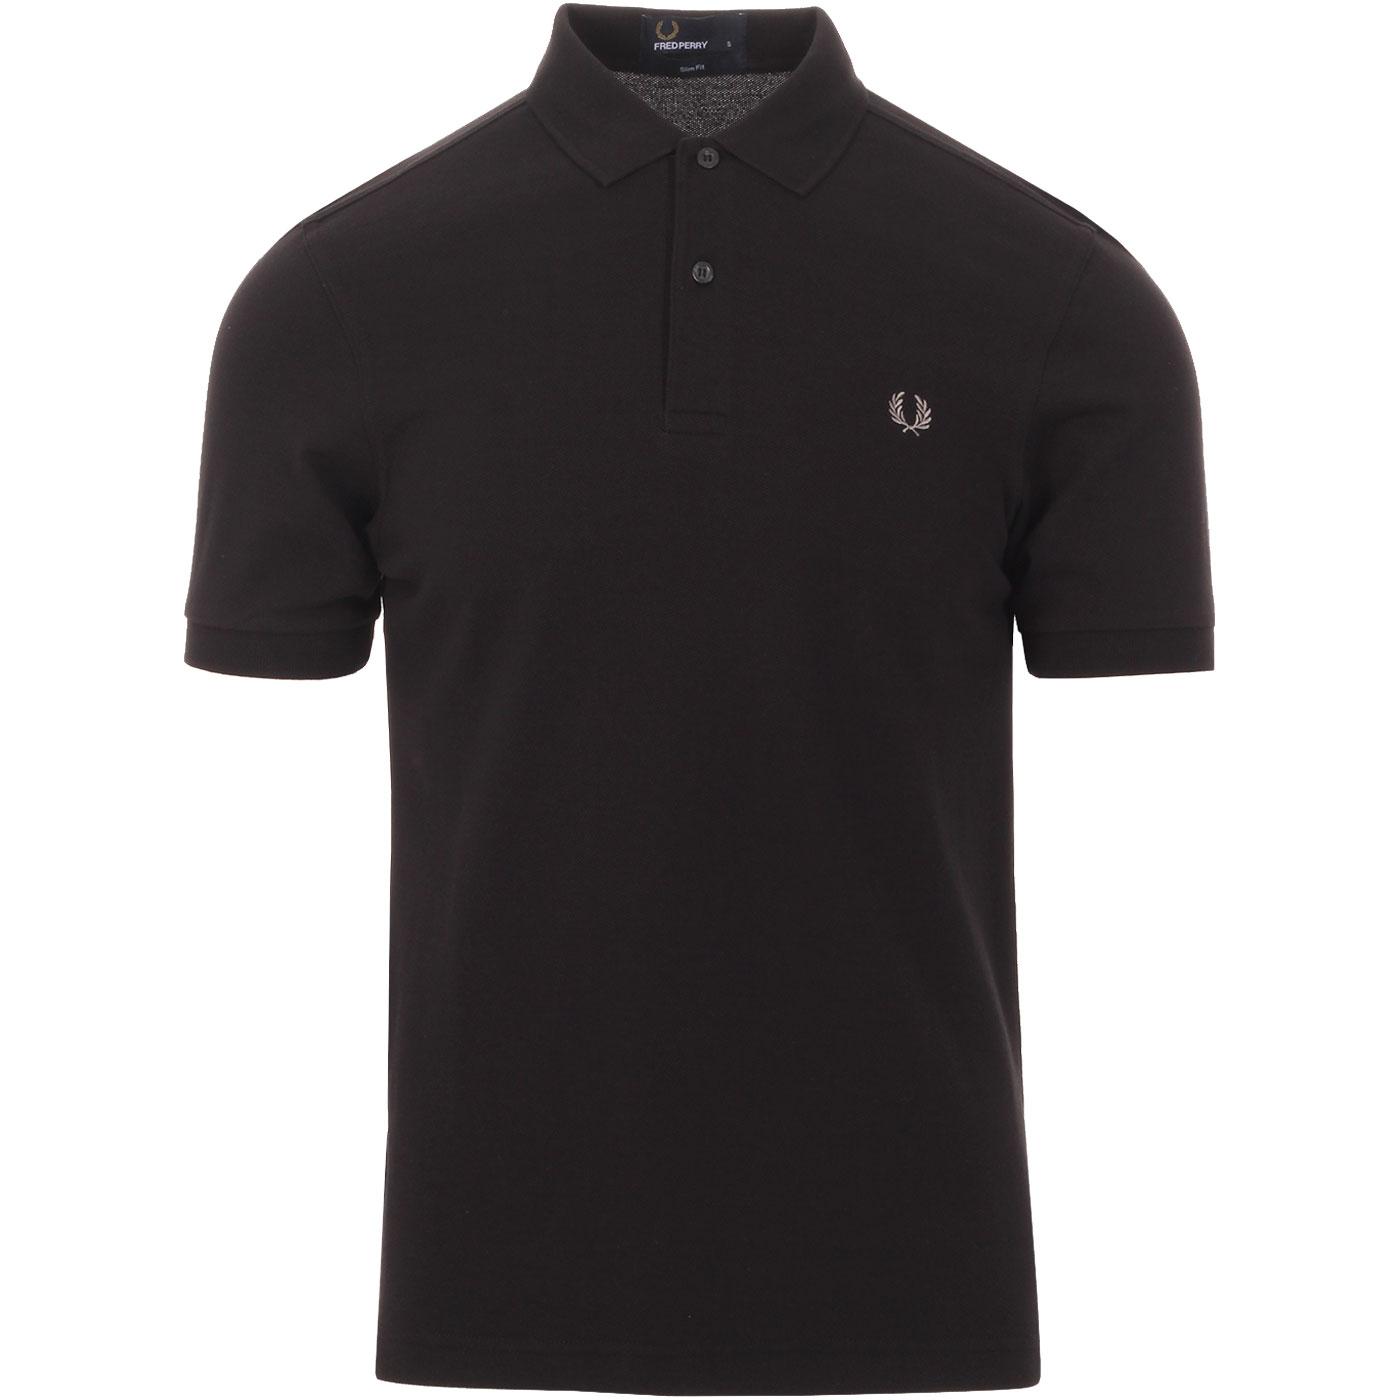 FRED PERRY Men's Retro Slim Fit Pique Polo Shirt in Black